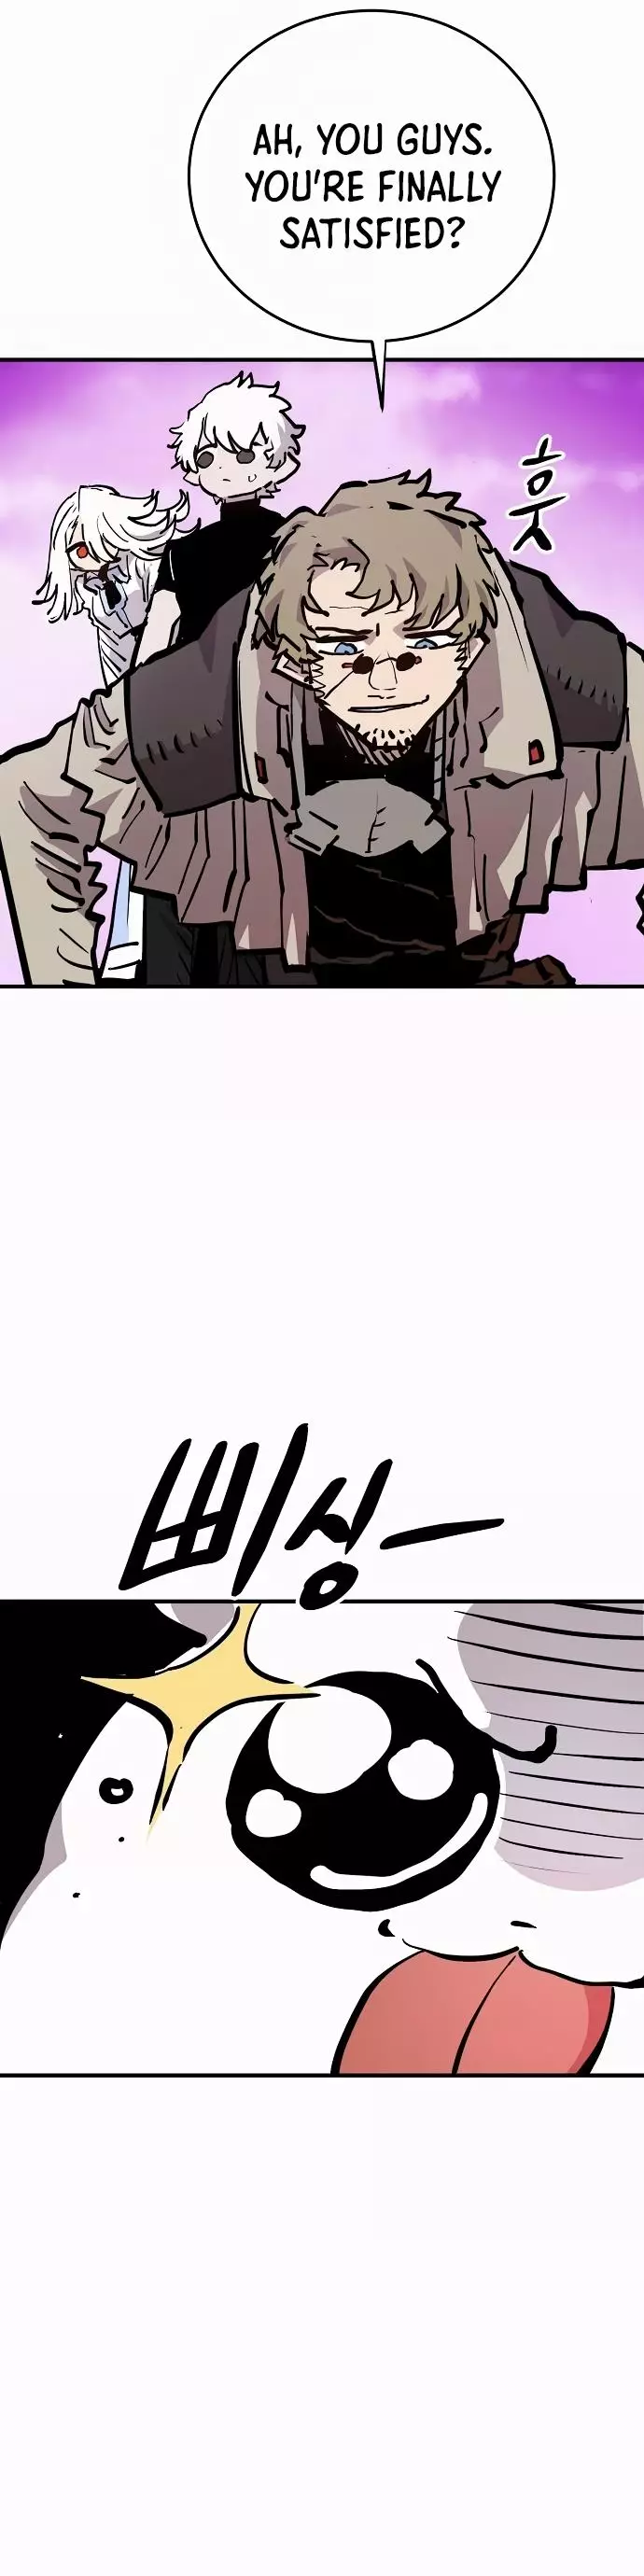 Player (Oh Hyeon-Jun) - 160 page 37-11d2a8ca